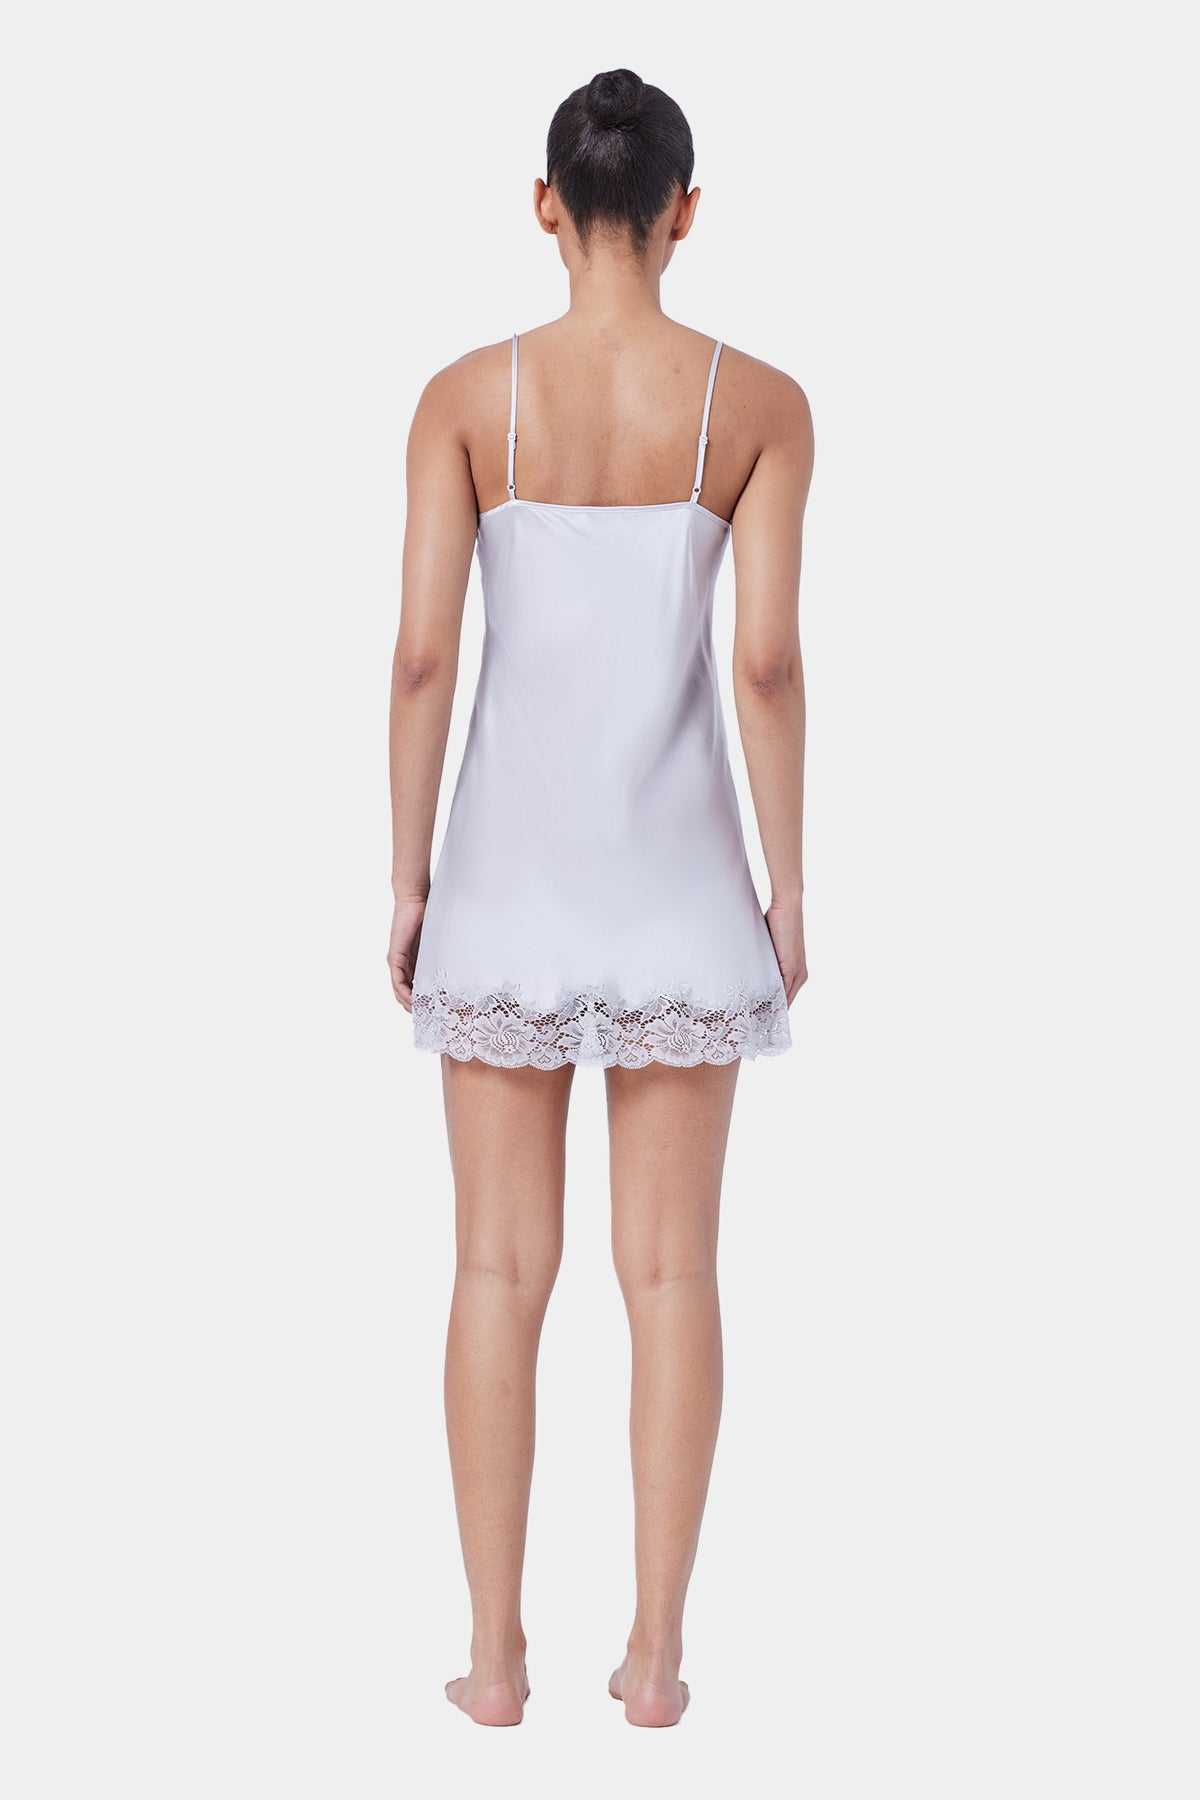 The Silk Chemise By GINIA In Silver